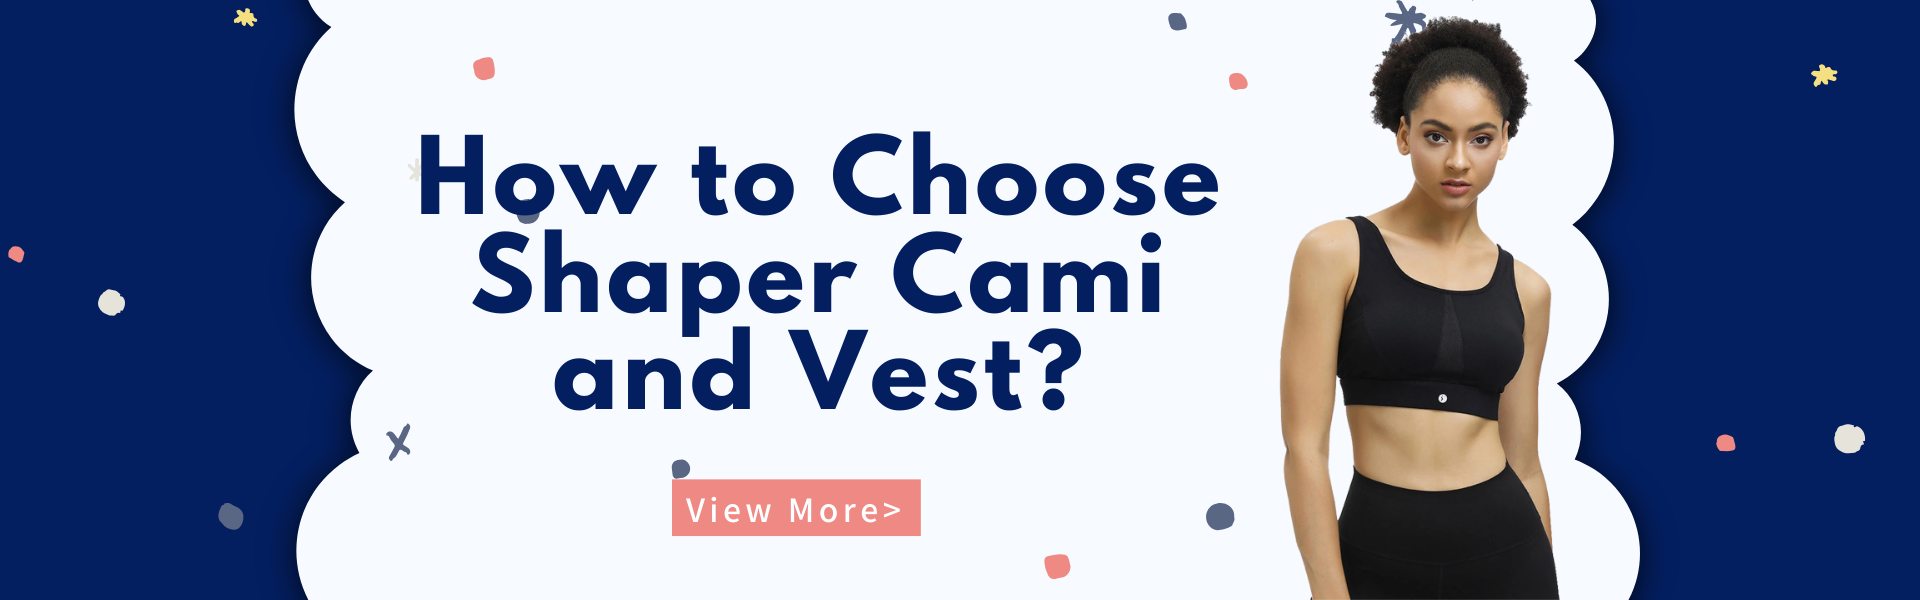 How to Choose Shaper Cami and Vest?